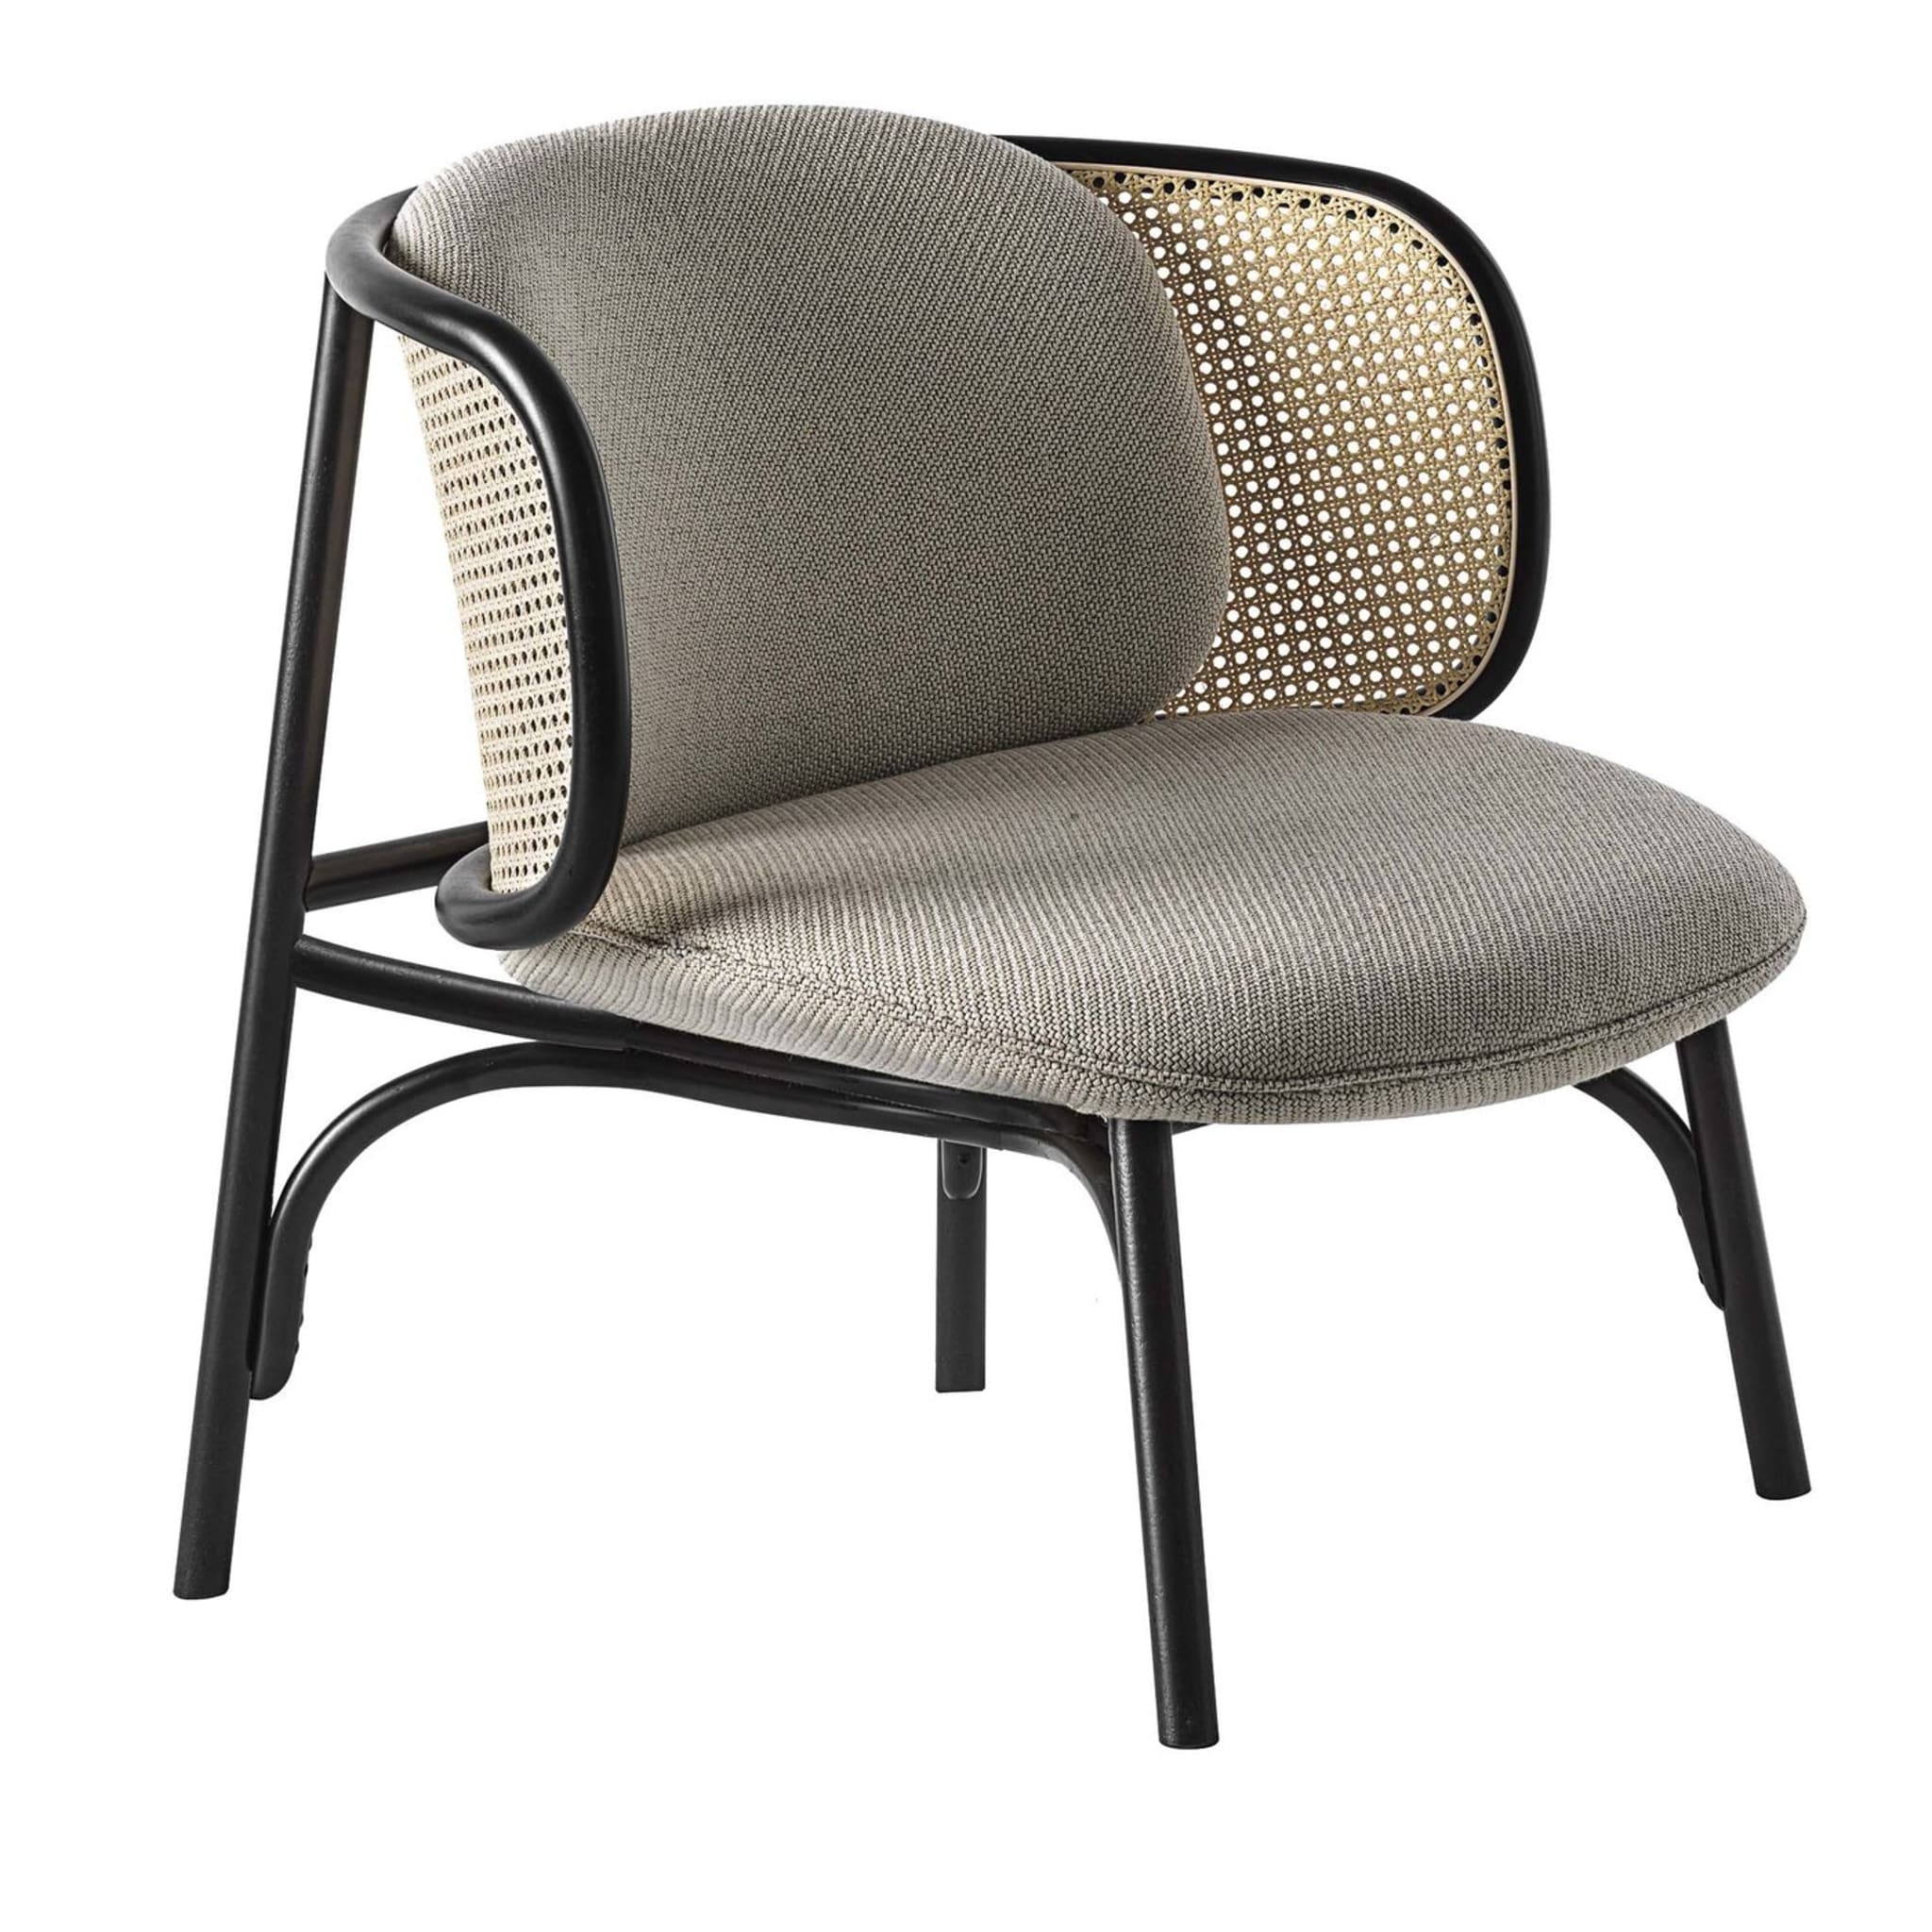 Suzenne Lounge Chair by Chiara Andreatti - Main view